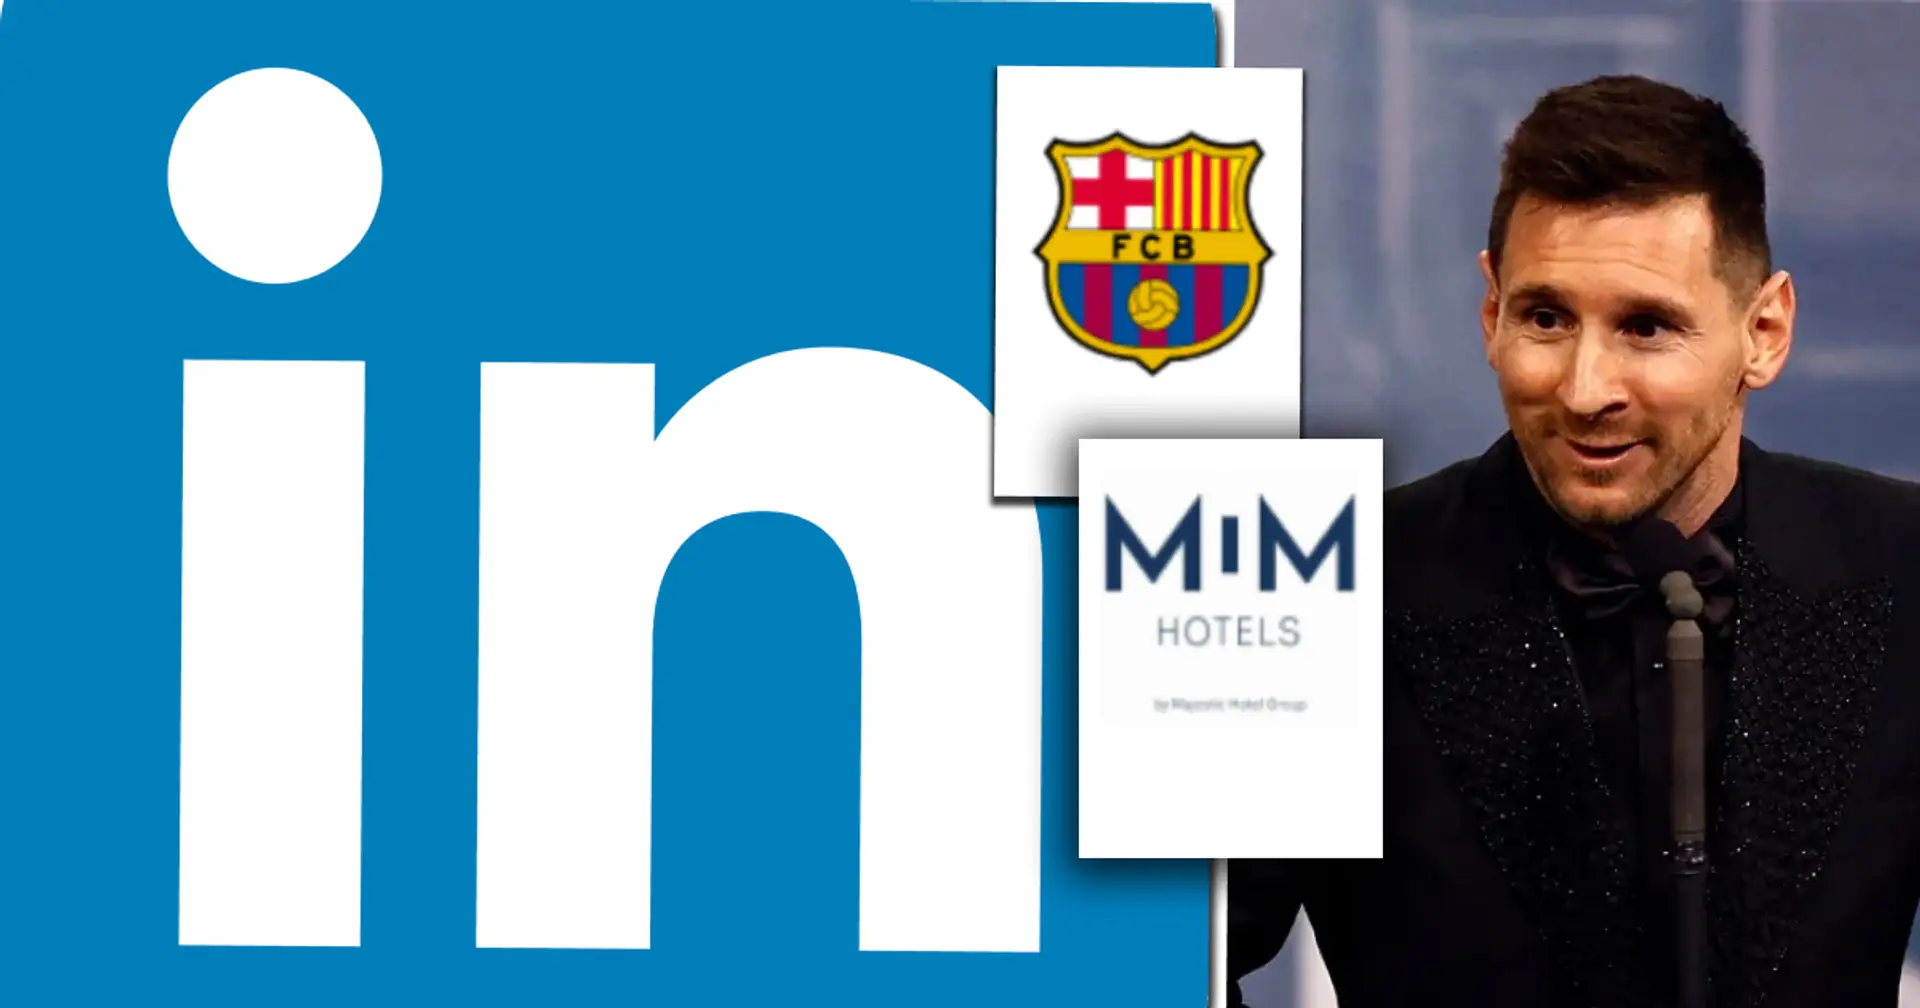 How Leo Messi’s profile on Linkedin would look like if he were to pursue a corporate business role